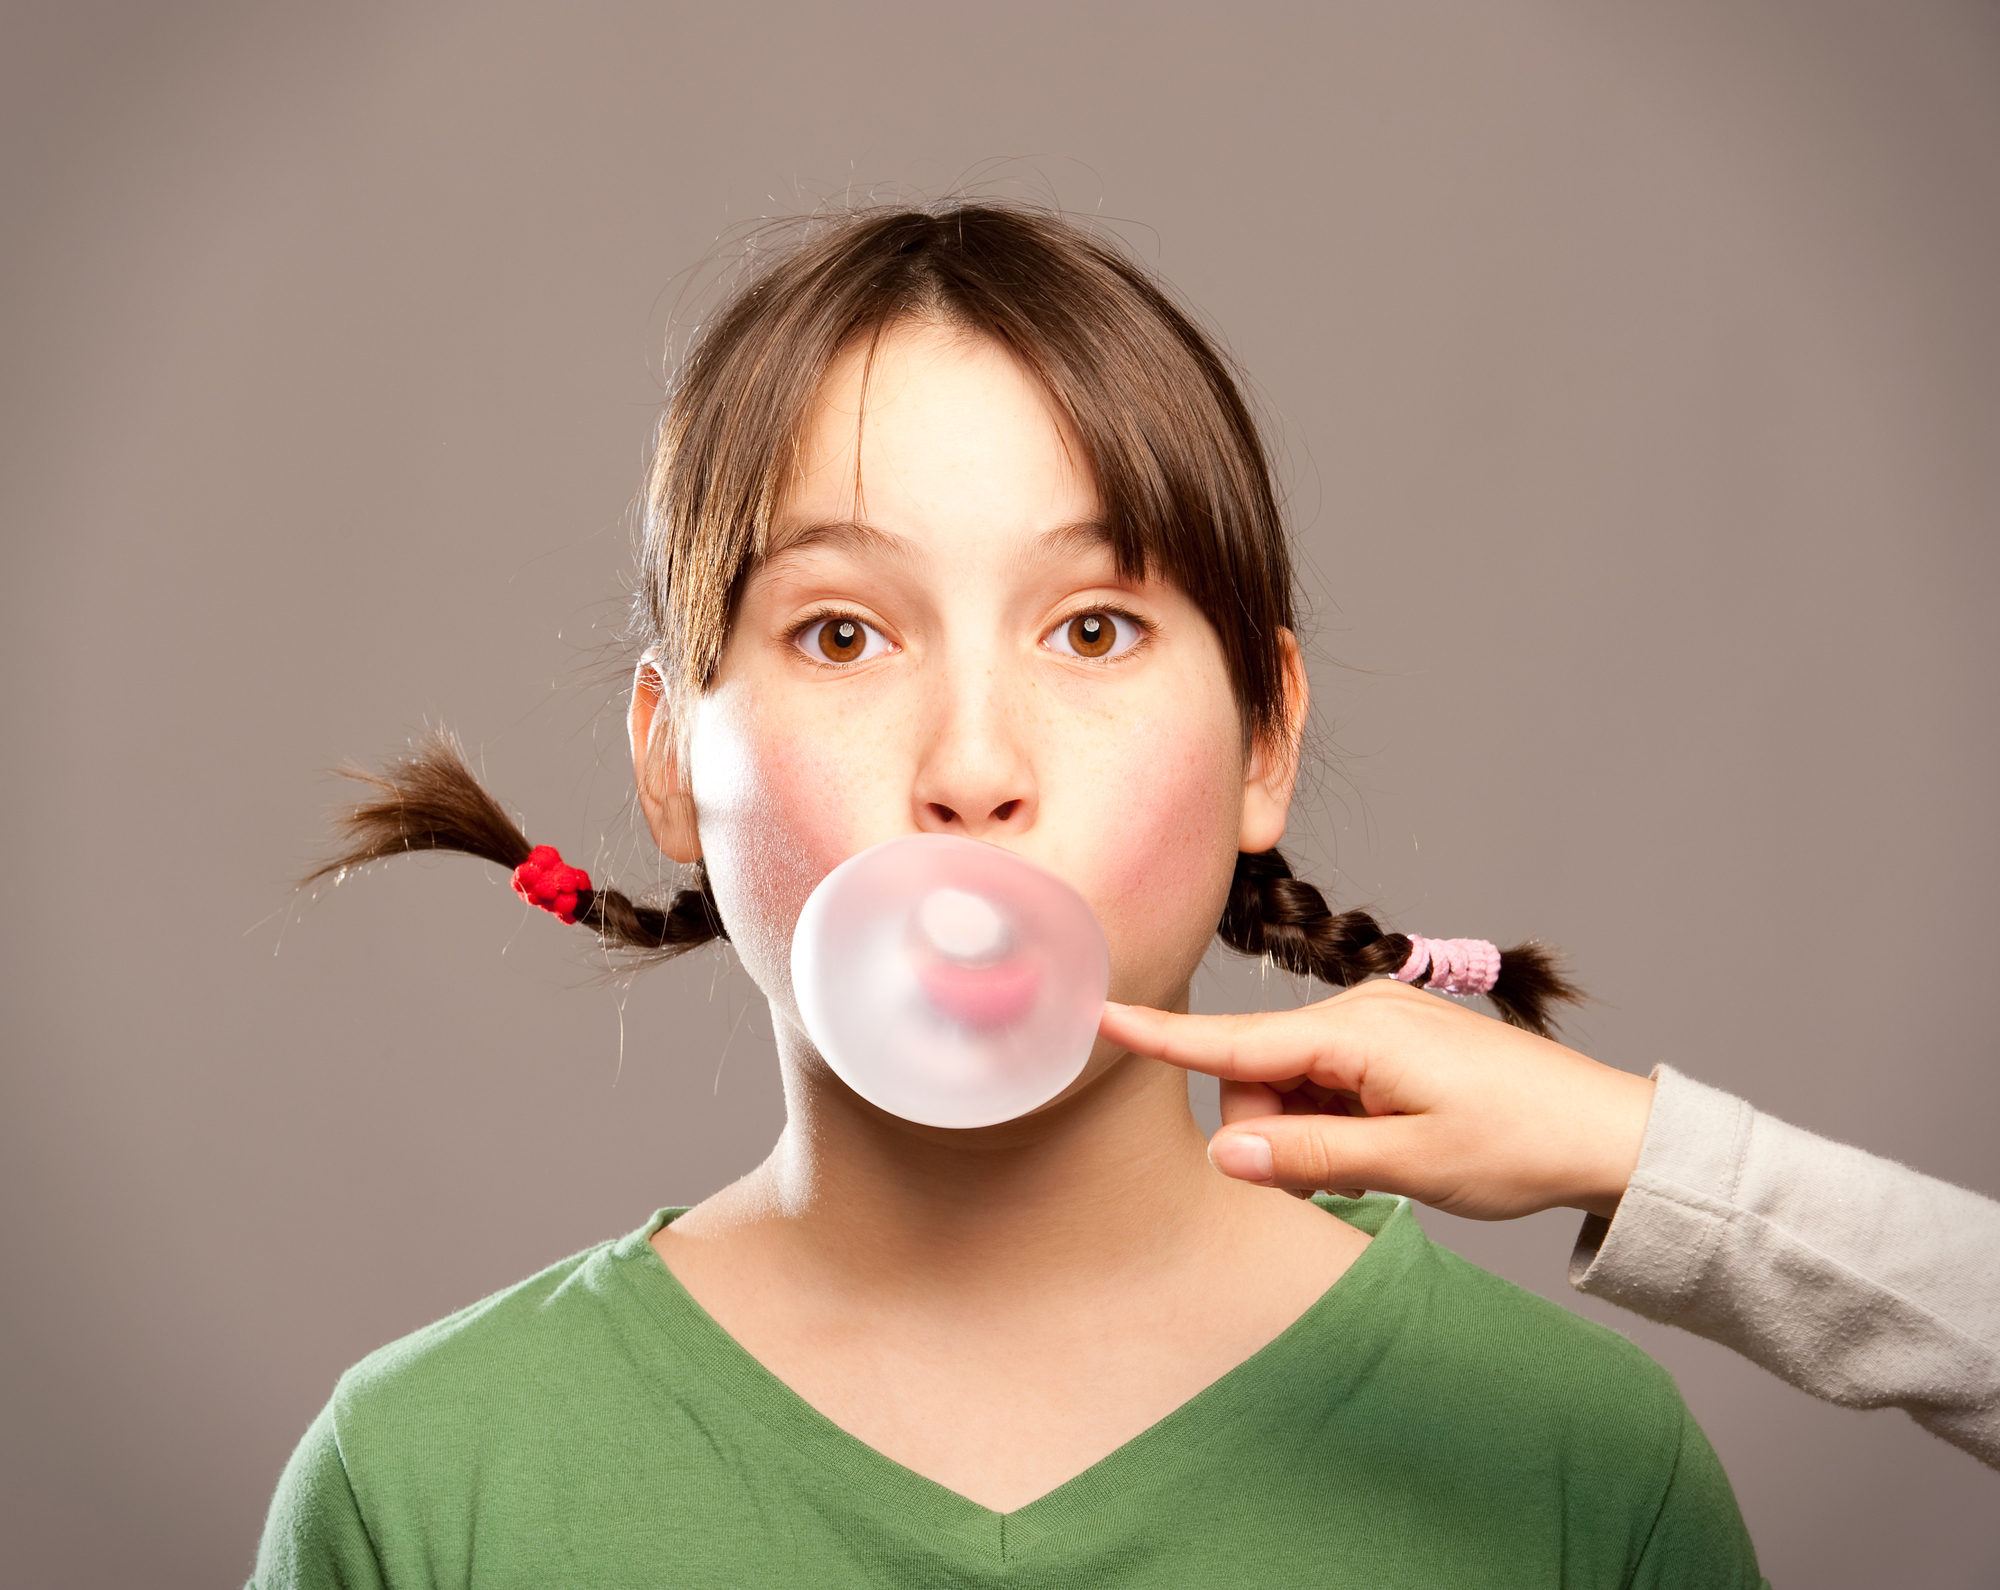 young girl making a bubble from chewing gum